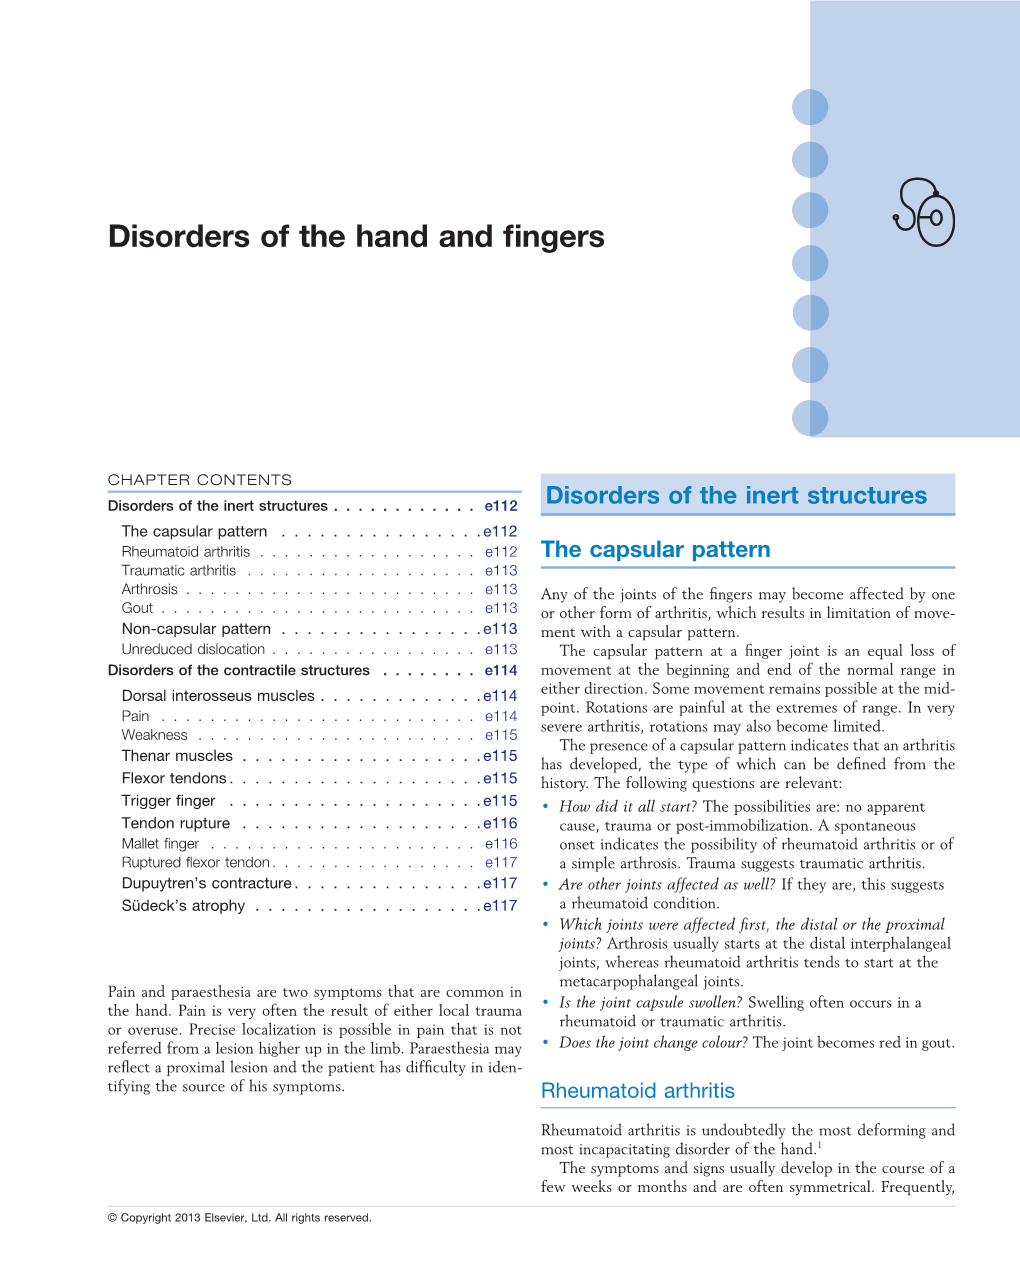 Disorders of the Hand and Fingers